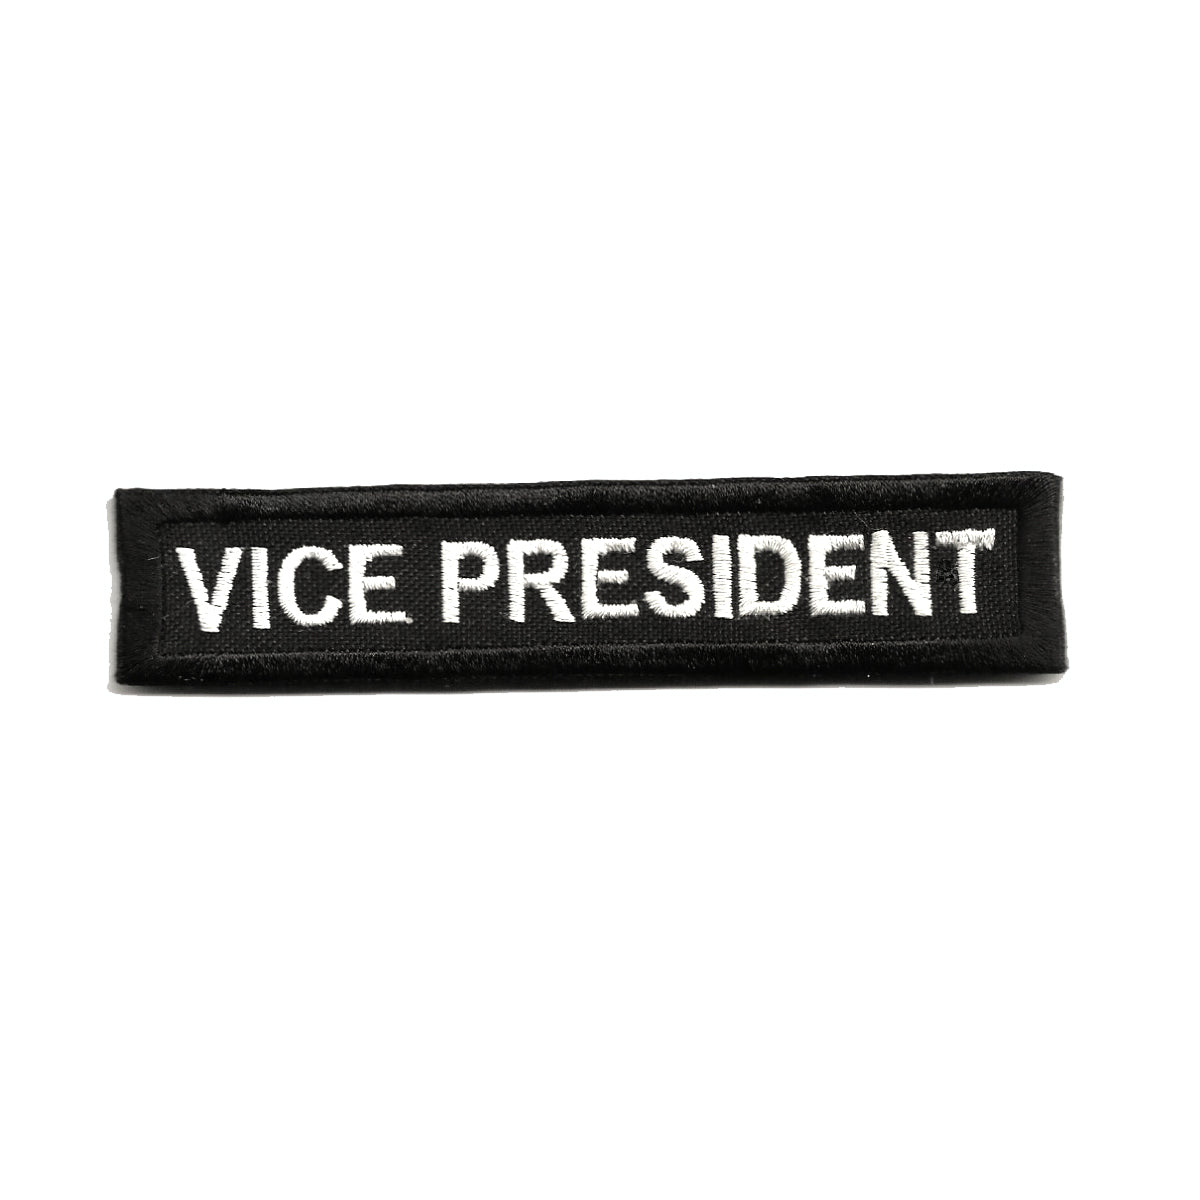 Vice President Name Patch- 4.8 x 1 inches